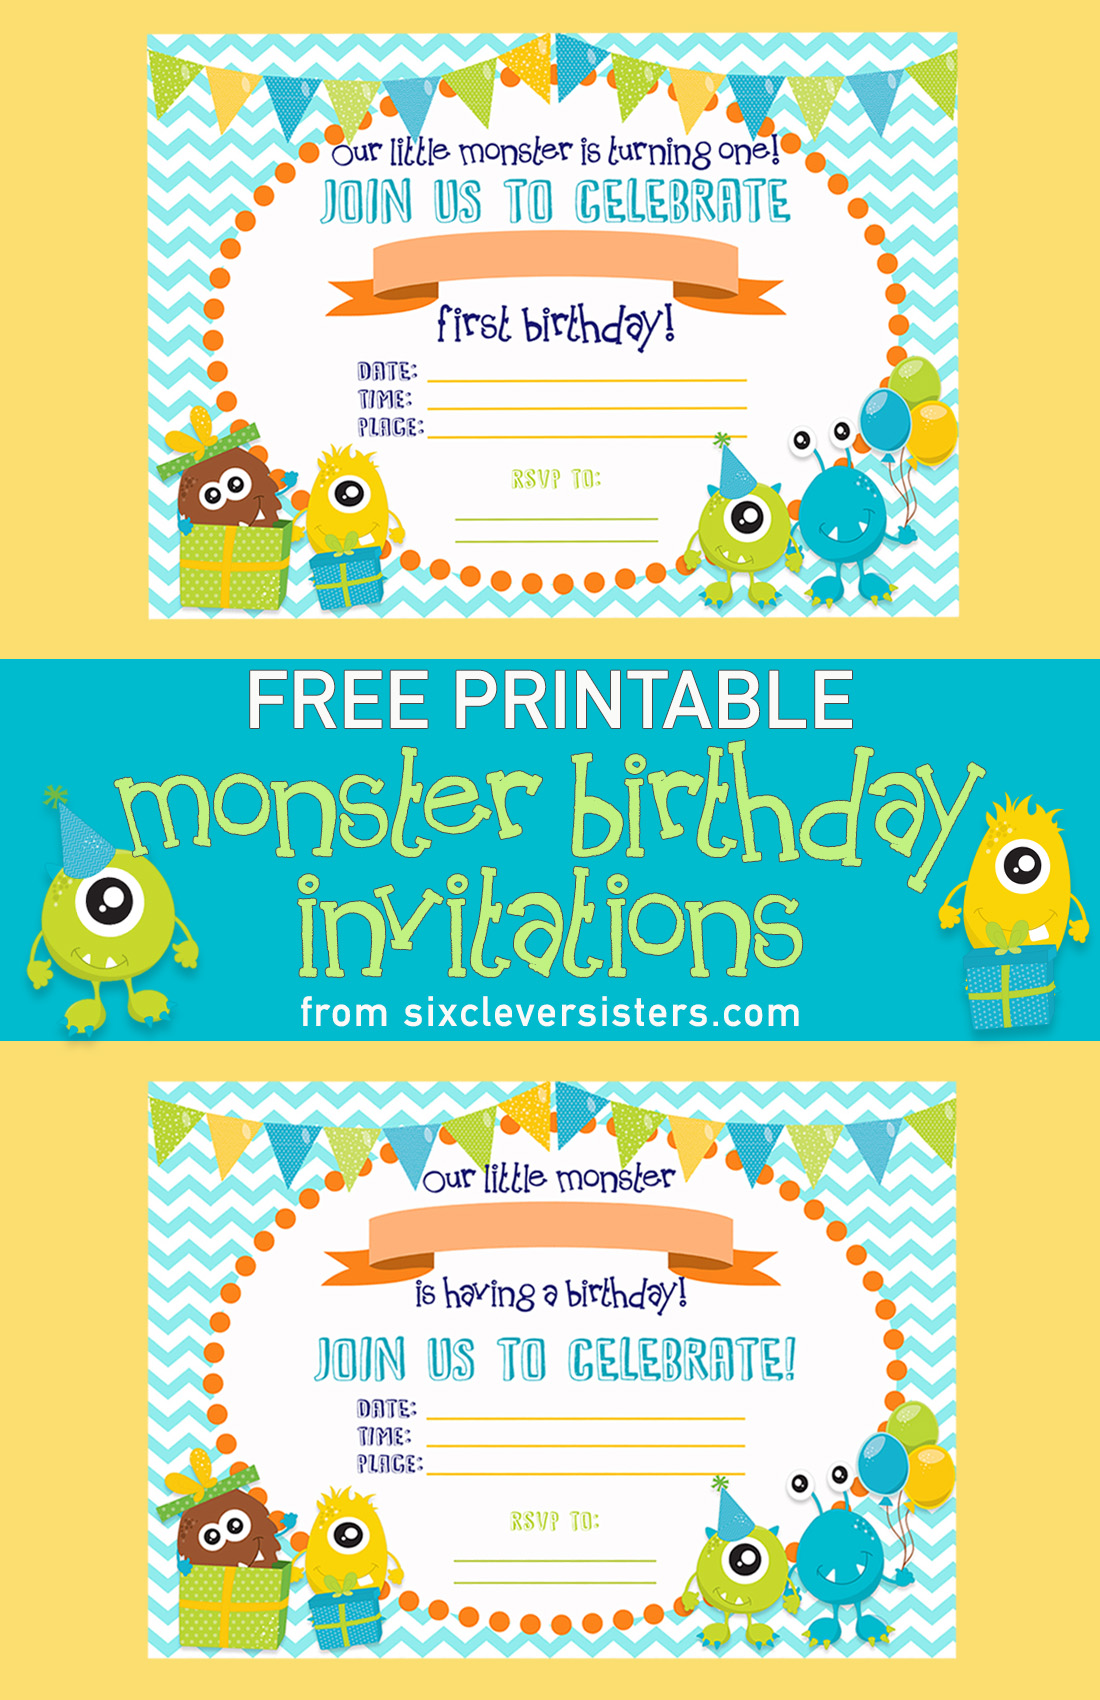 free-printable-monster-birthday-invitations-six-clever-sisters